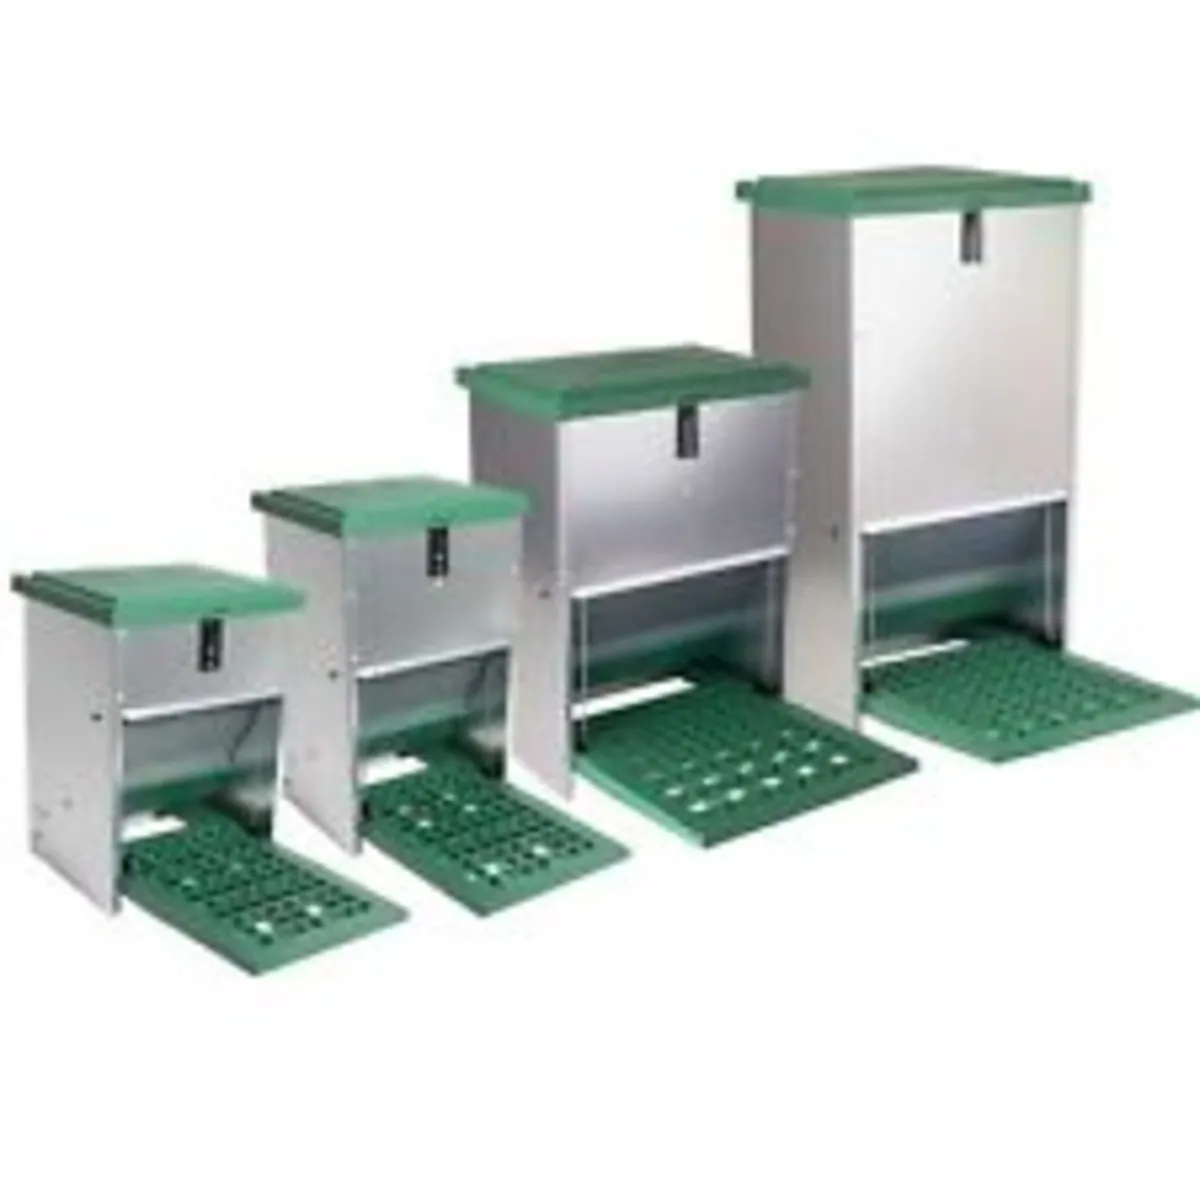 Treadle Feeders for Poultry Delivered Nationwide. - Image 1